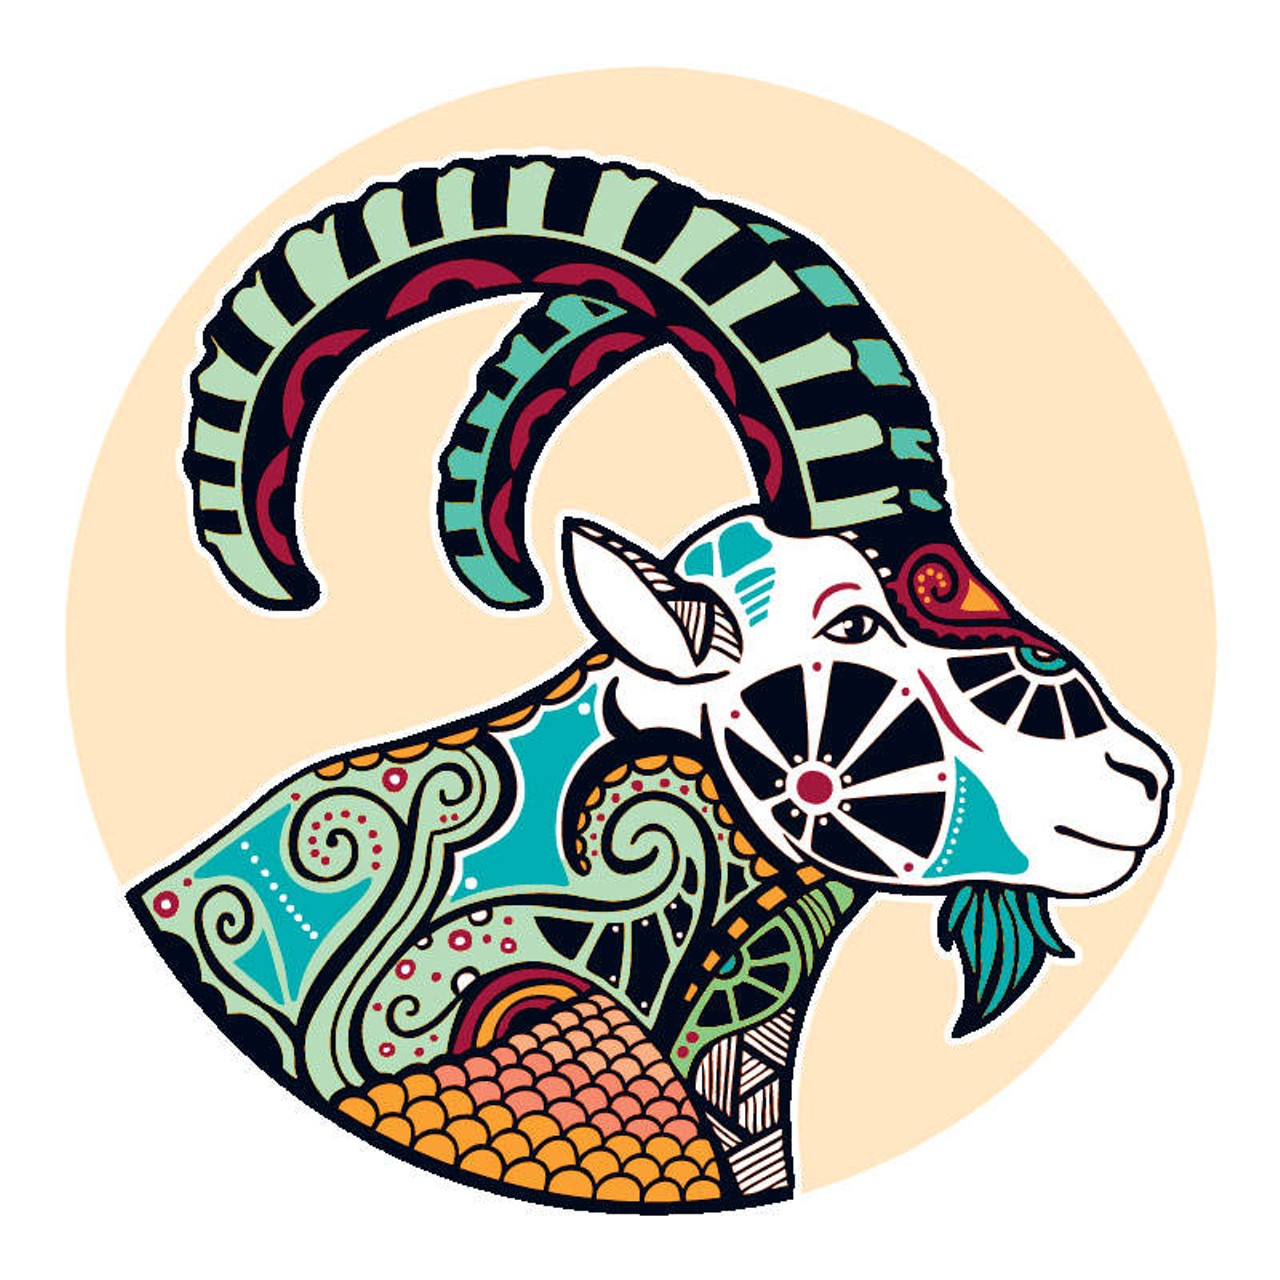 CAPRICORN (Dec. 21-Jan. 20): 
You wish you had a clear sense of which direction to take. It&#146;s not that you&#146;re denying the need for change; it&#146;s more about not knowing what you want anymore. There could be many reasons why you can&#146;t seem to do much but sleepwalk through your experience, and just as many reasons to wish you felt more connected to it. The thought that it might help to get more ambitious, gregarious, or involved would make sense if your situation required it. Right now, it would be better for everyone if you could stop long enough to figure out where you stand with this.